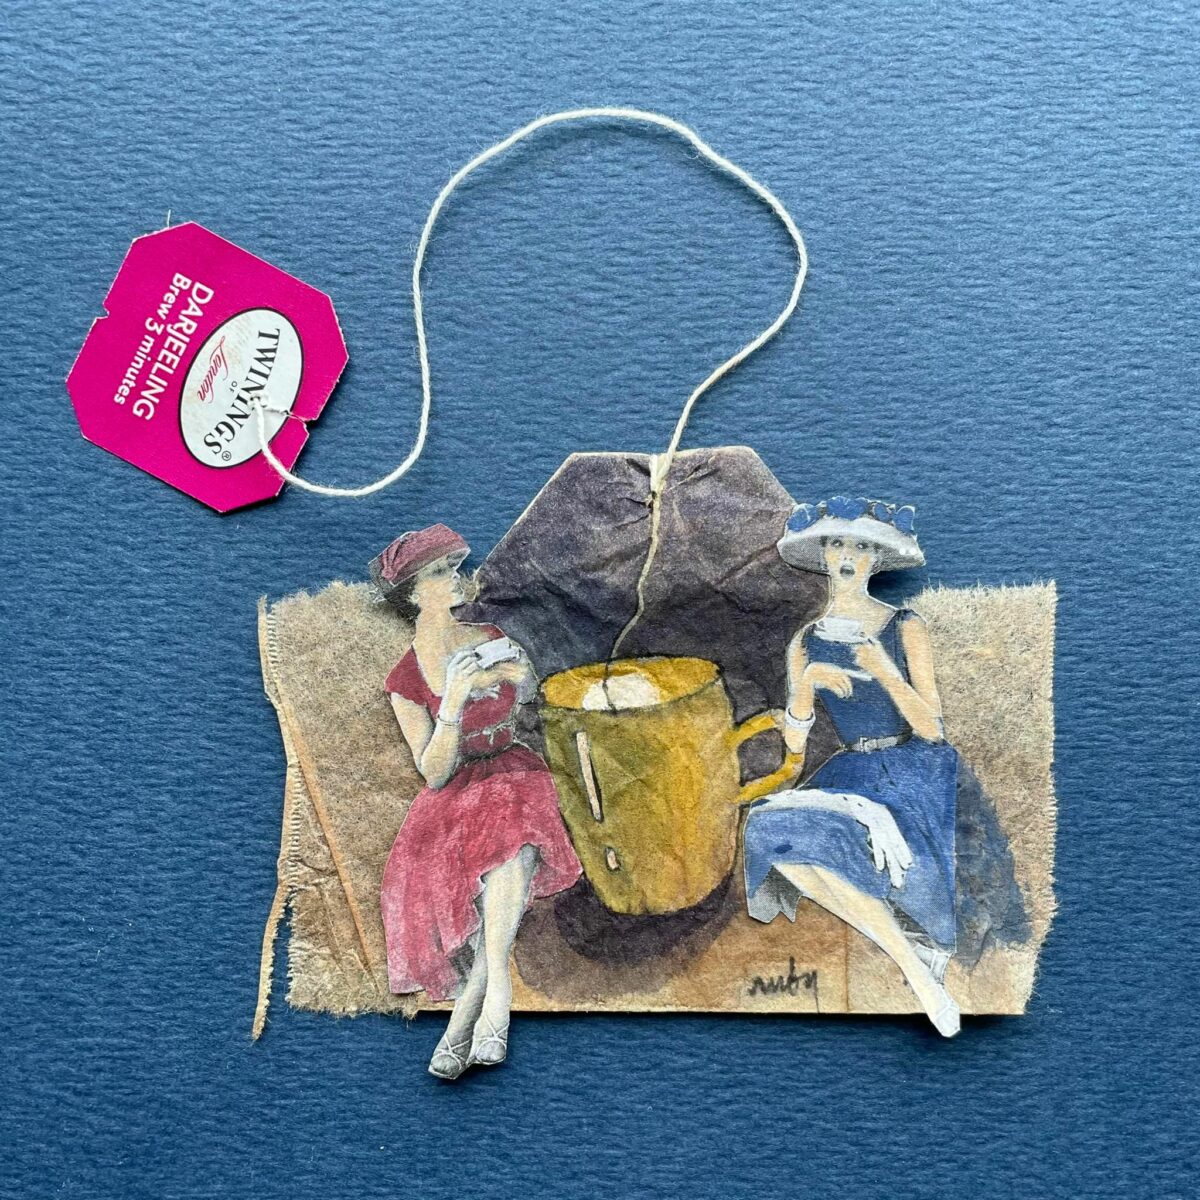 Gorgeous Miniature Watercolors Painted On Used Teabags By Ruby Silvious 7